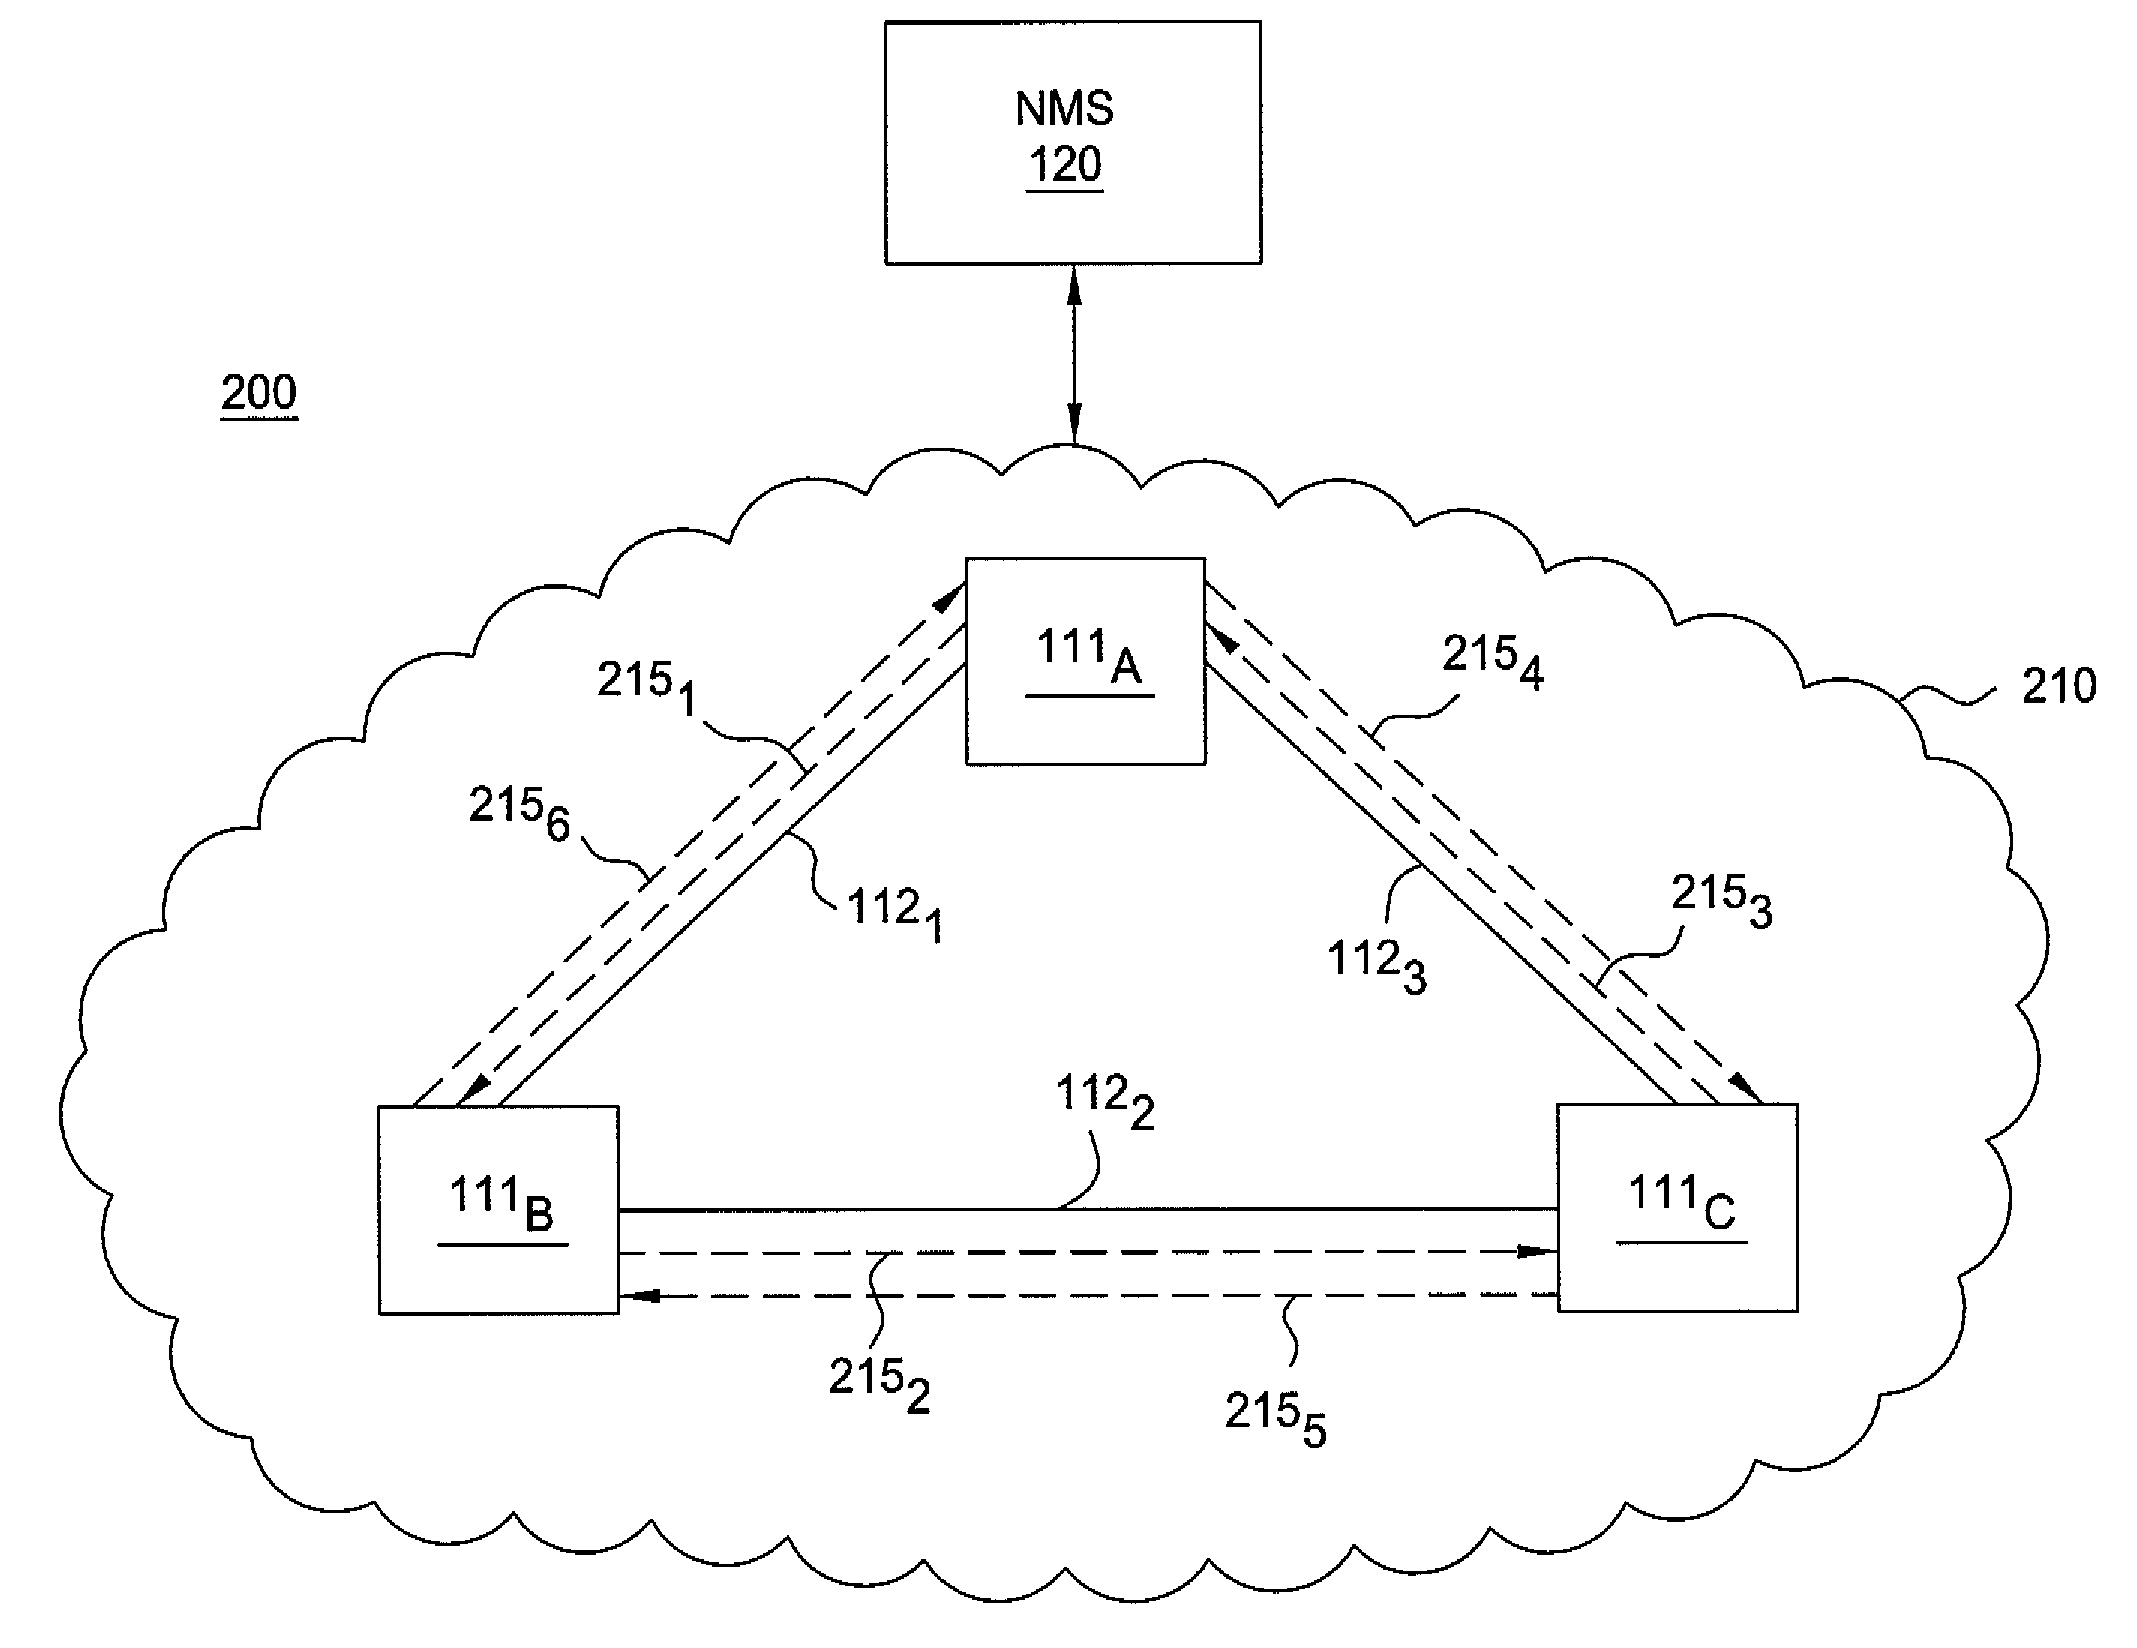 Method and apparatus for providing full logical connectivity in MPLS networks